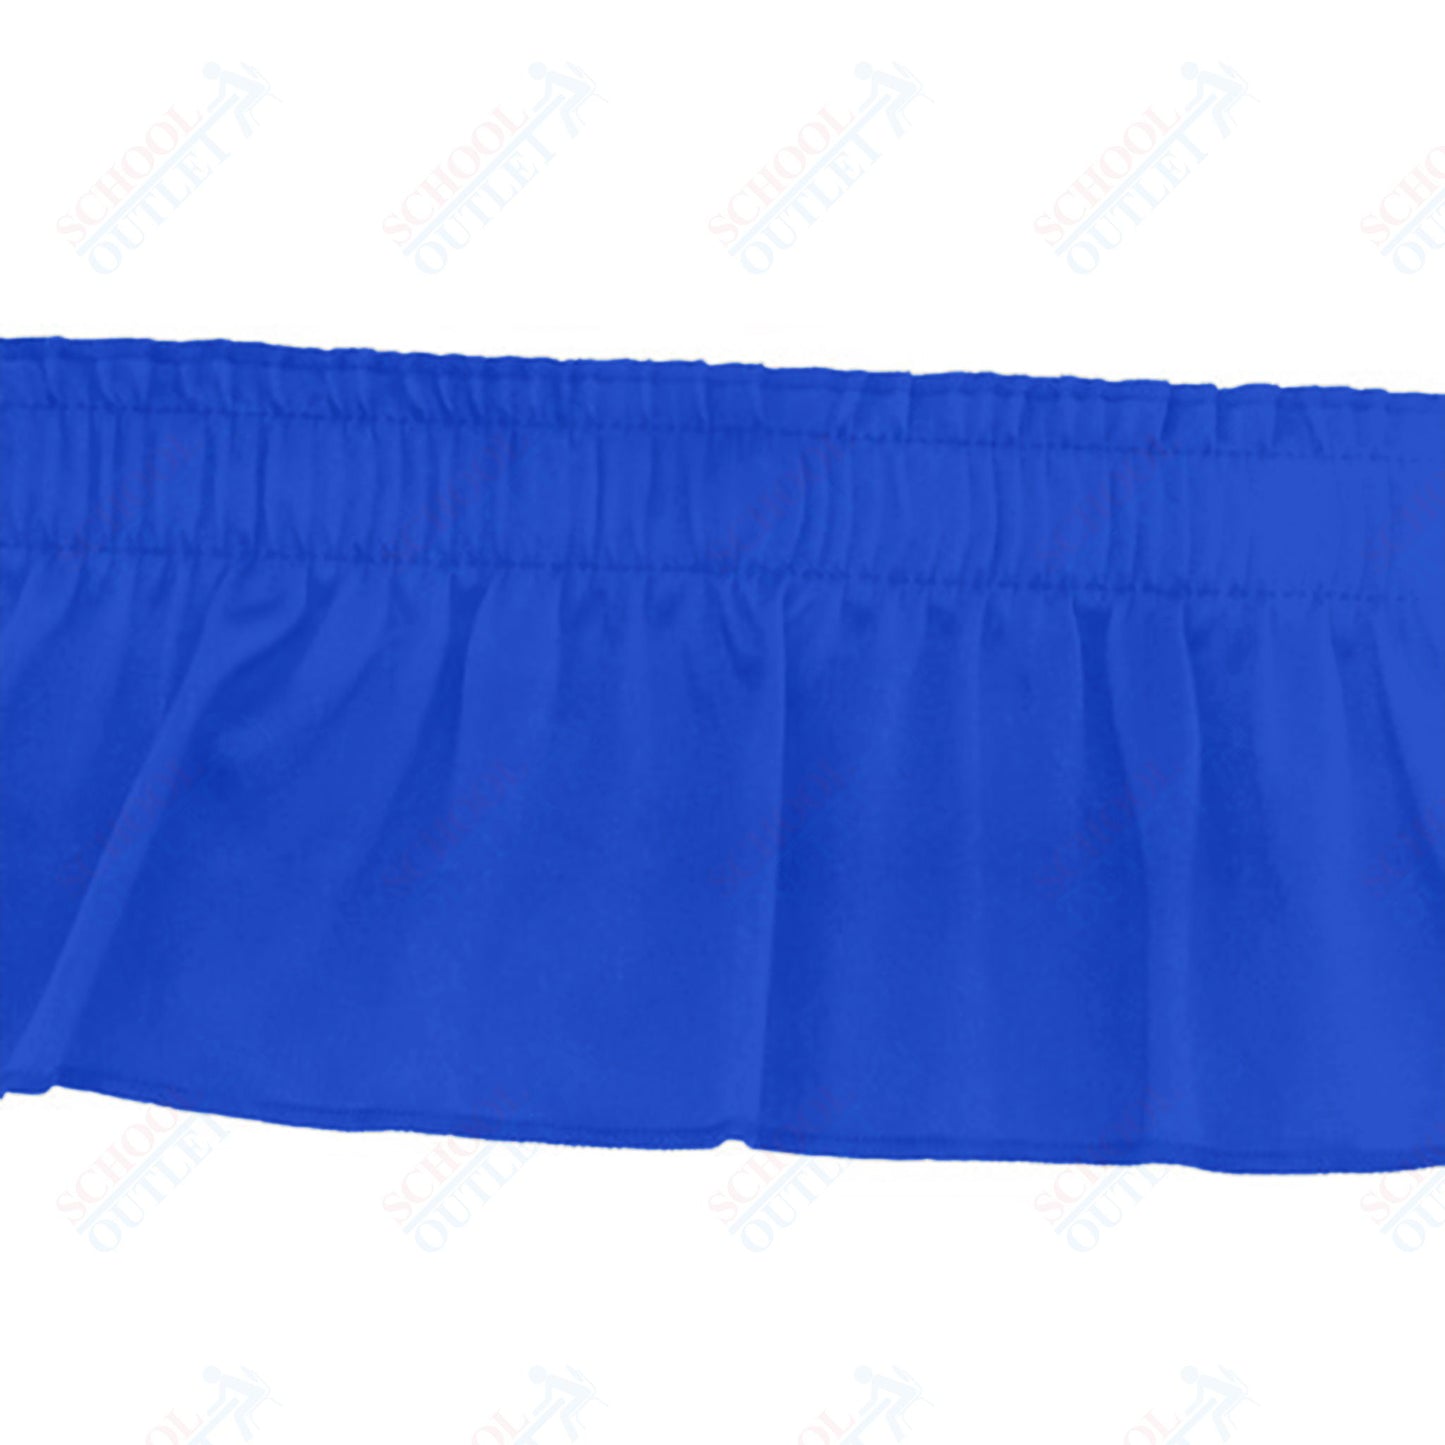 AmTab Stage and Riser Skirting - Shirred Pleat - 15" Skirting Height - Applicable for 16" Stage Height   (AmTab AMT-SKRT16)